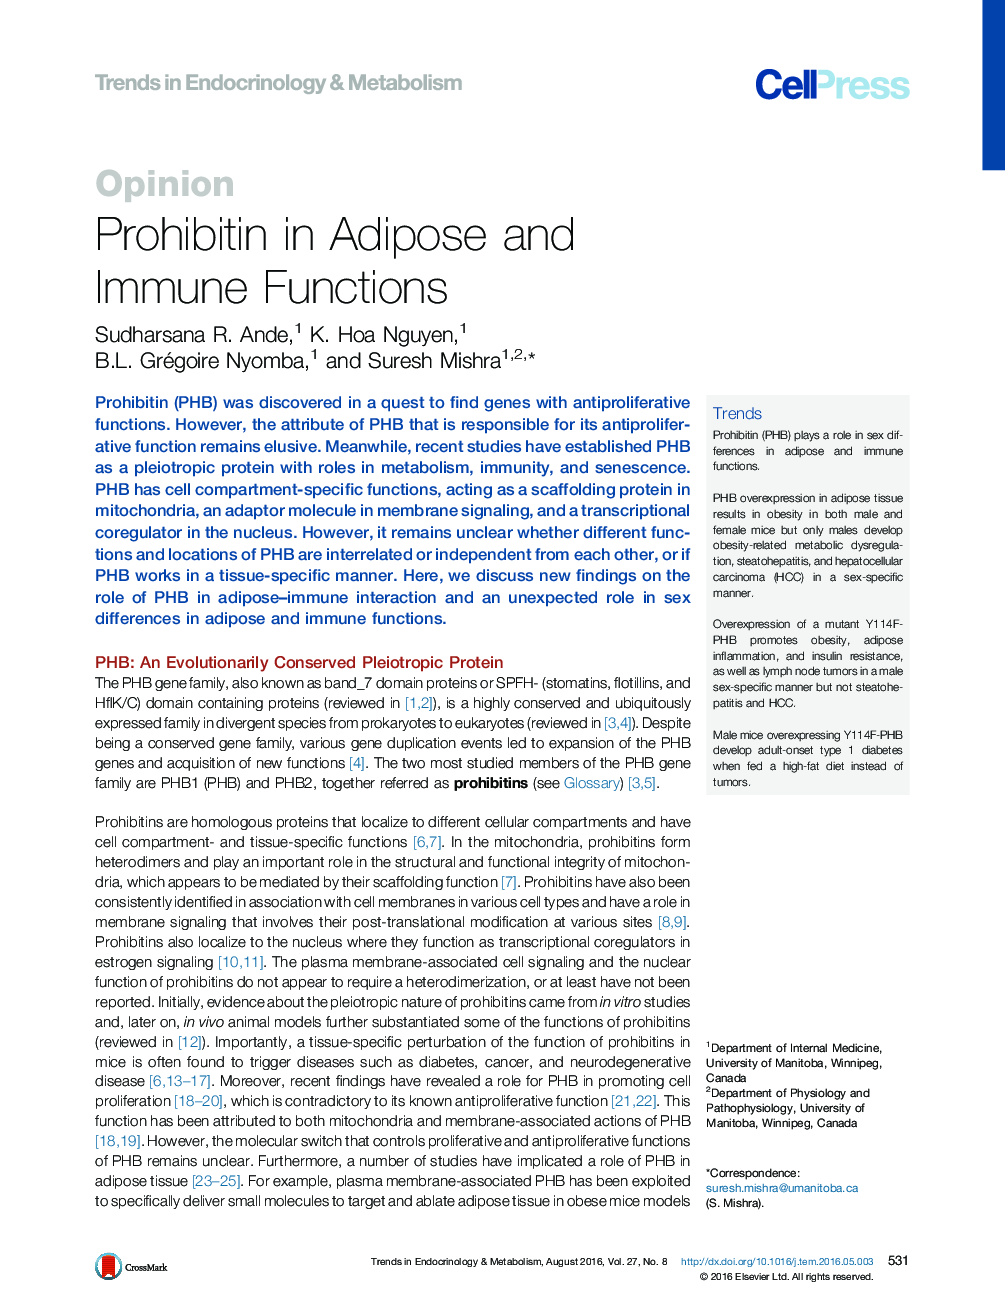 Prohibitin in Adipose and Immune Functions